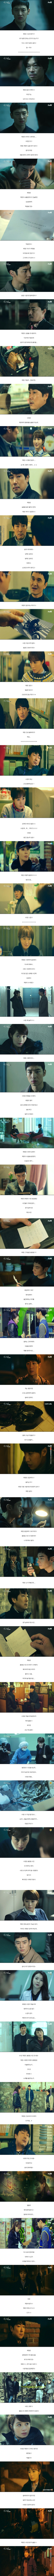 episodes 9 and 10 captures for the Korean drama 'Signal'